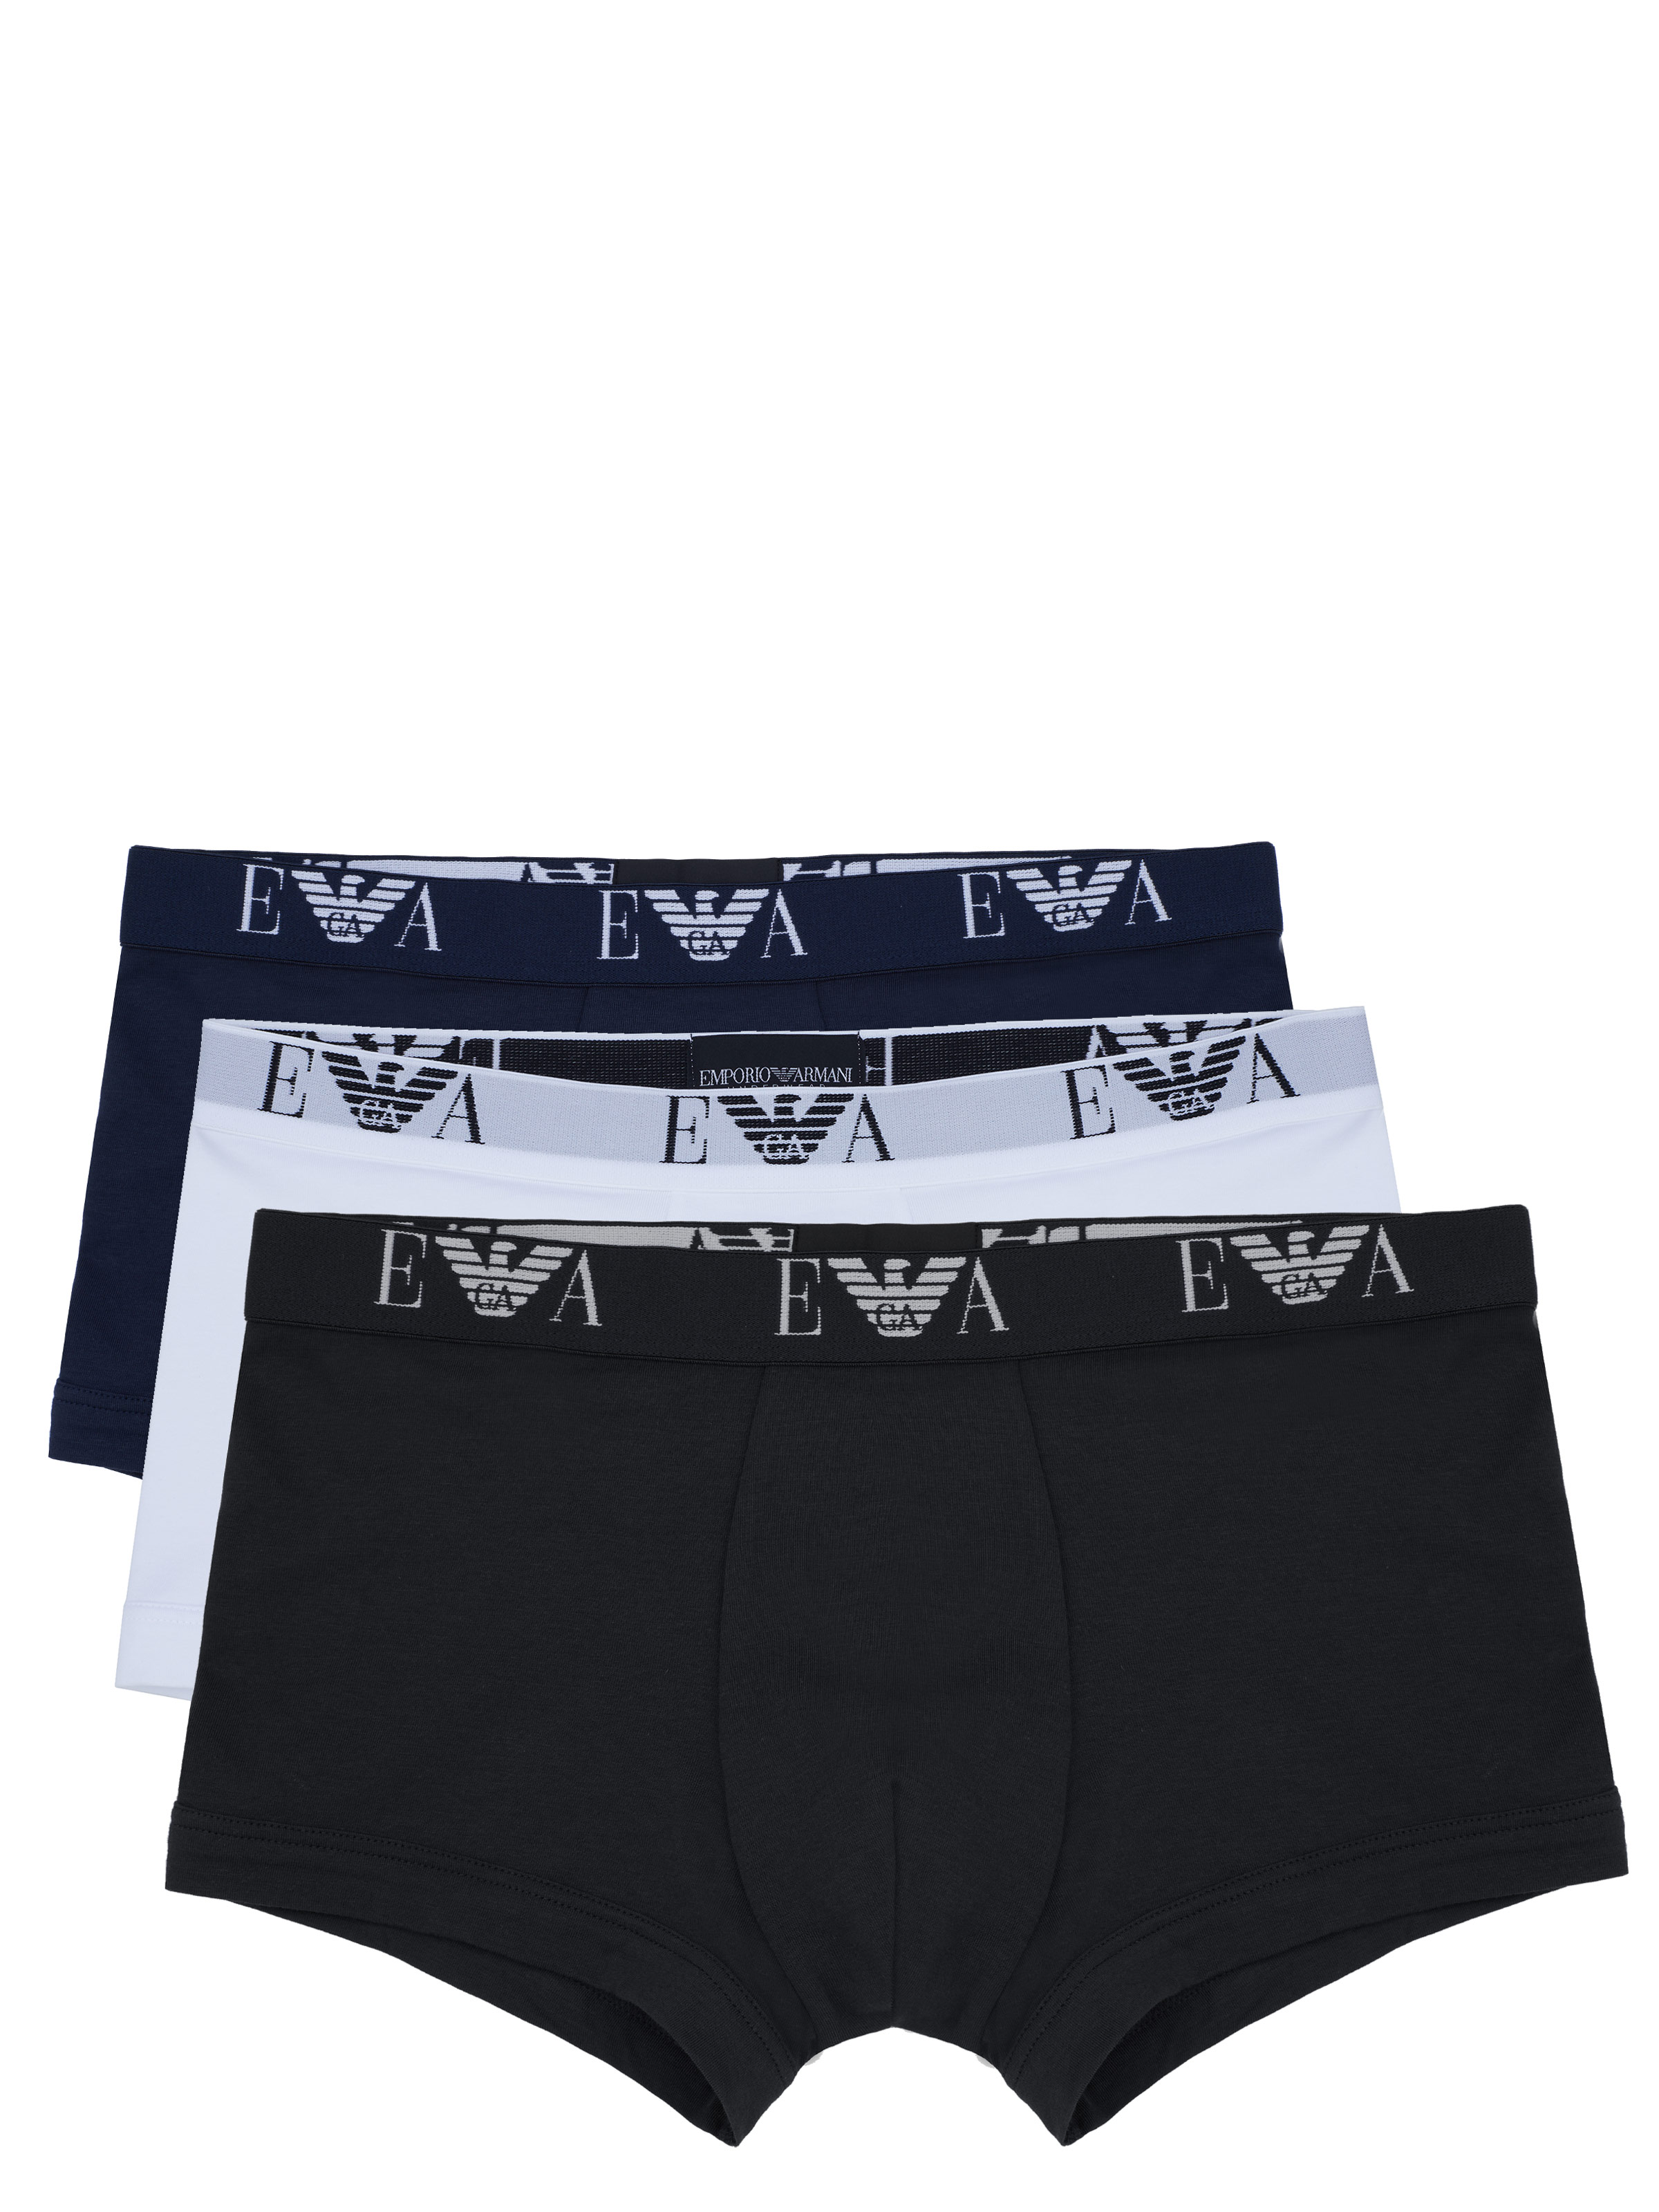 Moschino Branded boxers 3-pack, Men's Clothing